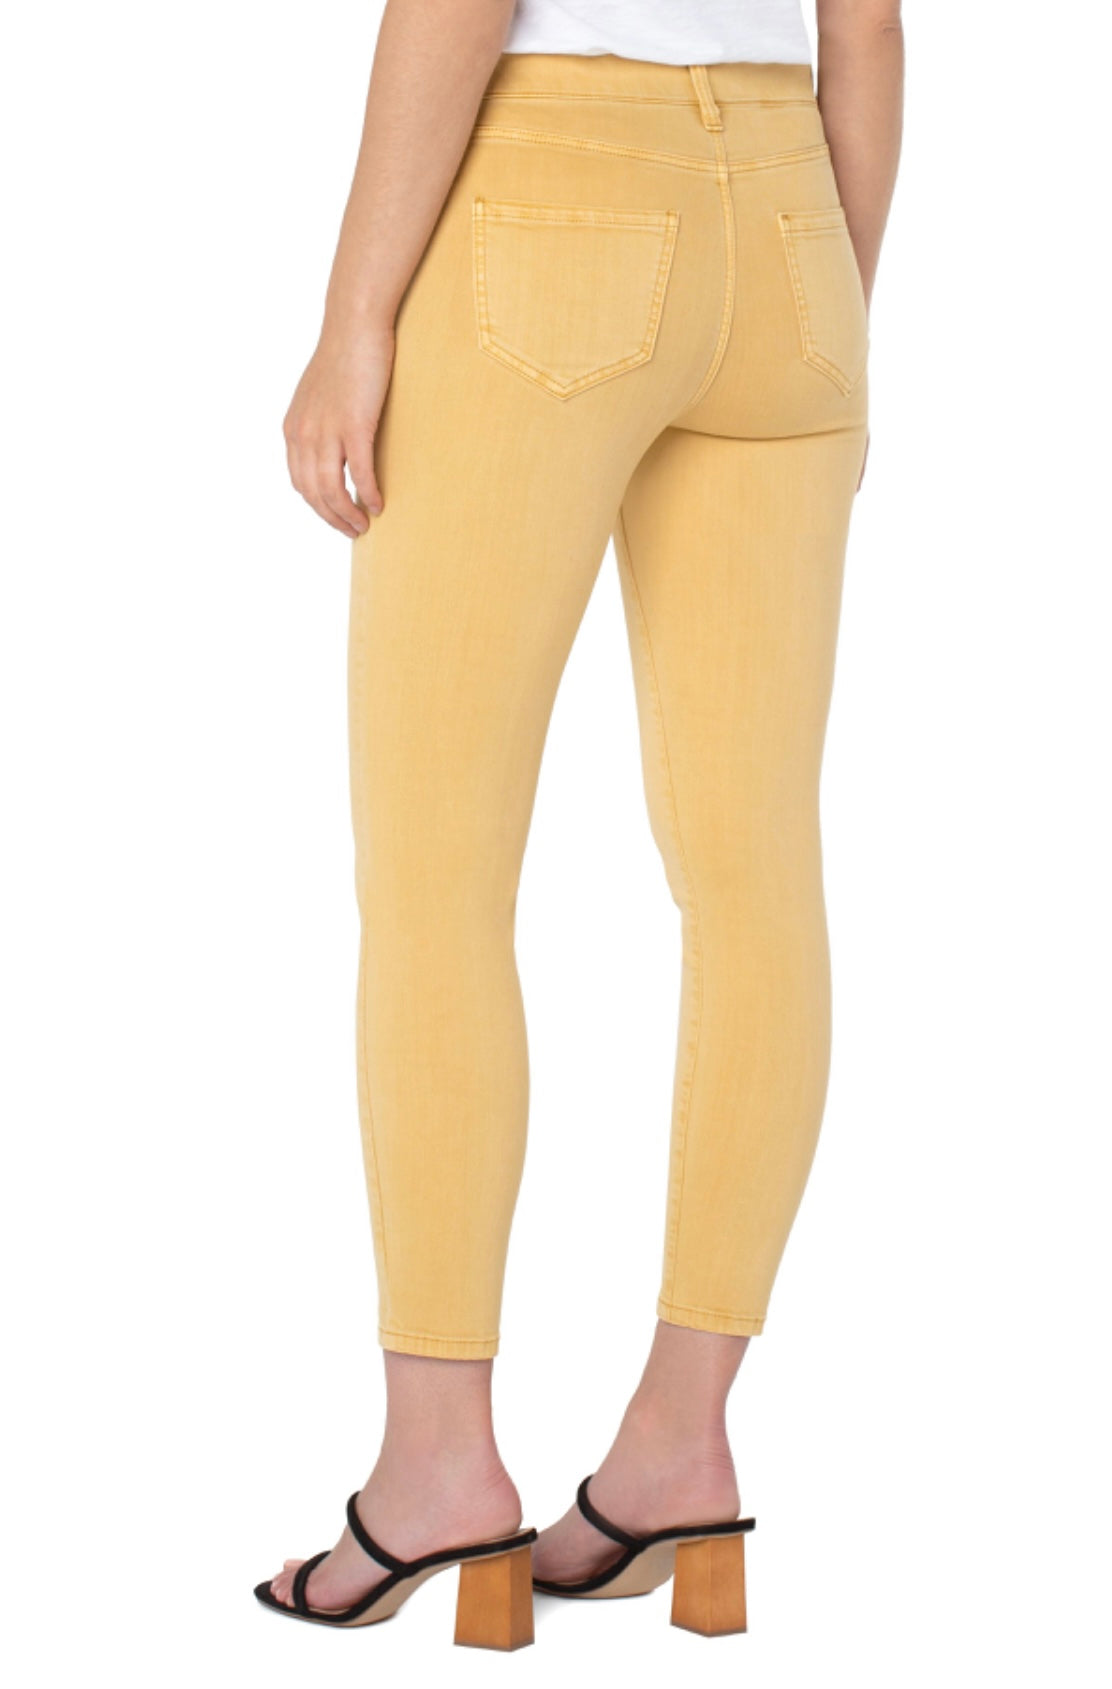 The Gia Glider Crop Skinny in Golden Glow